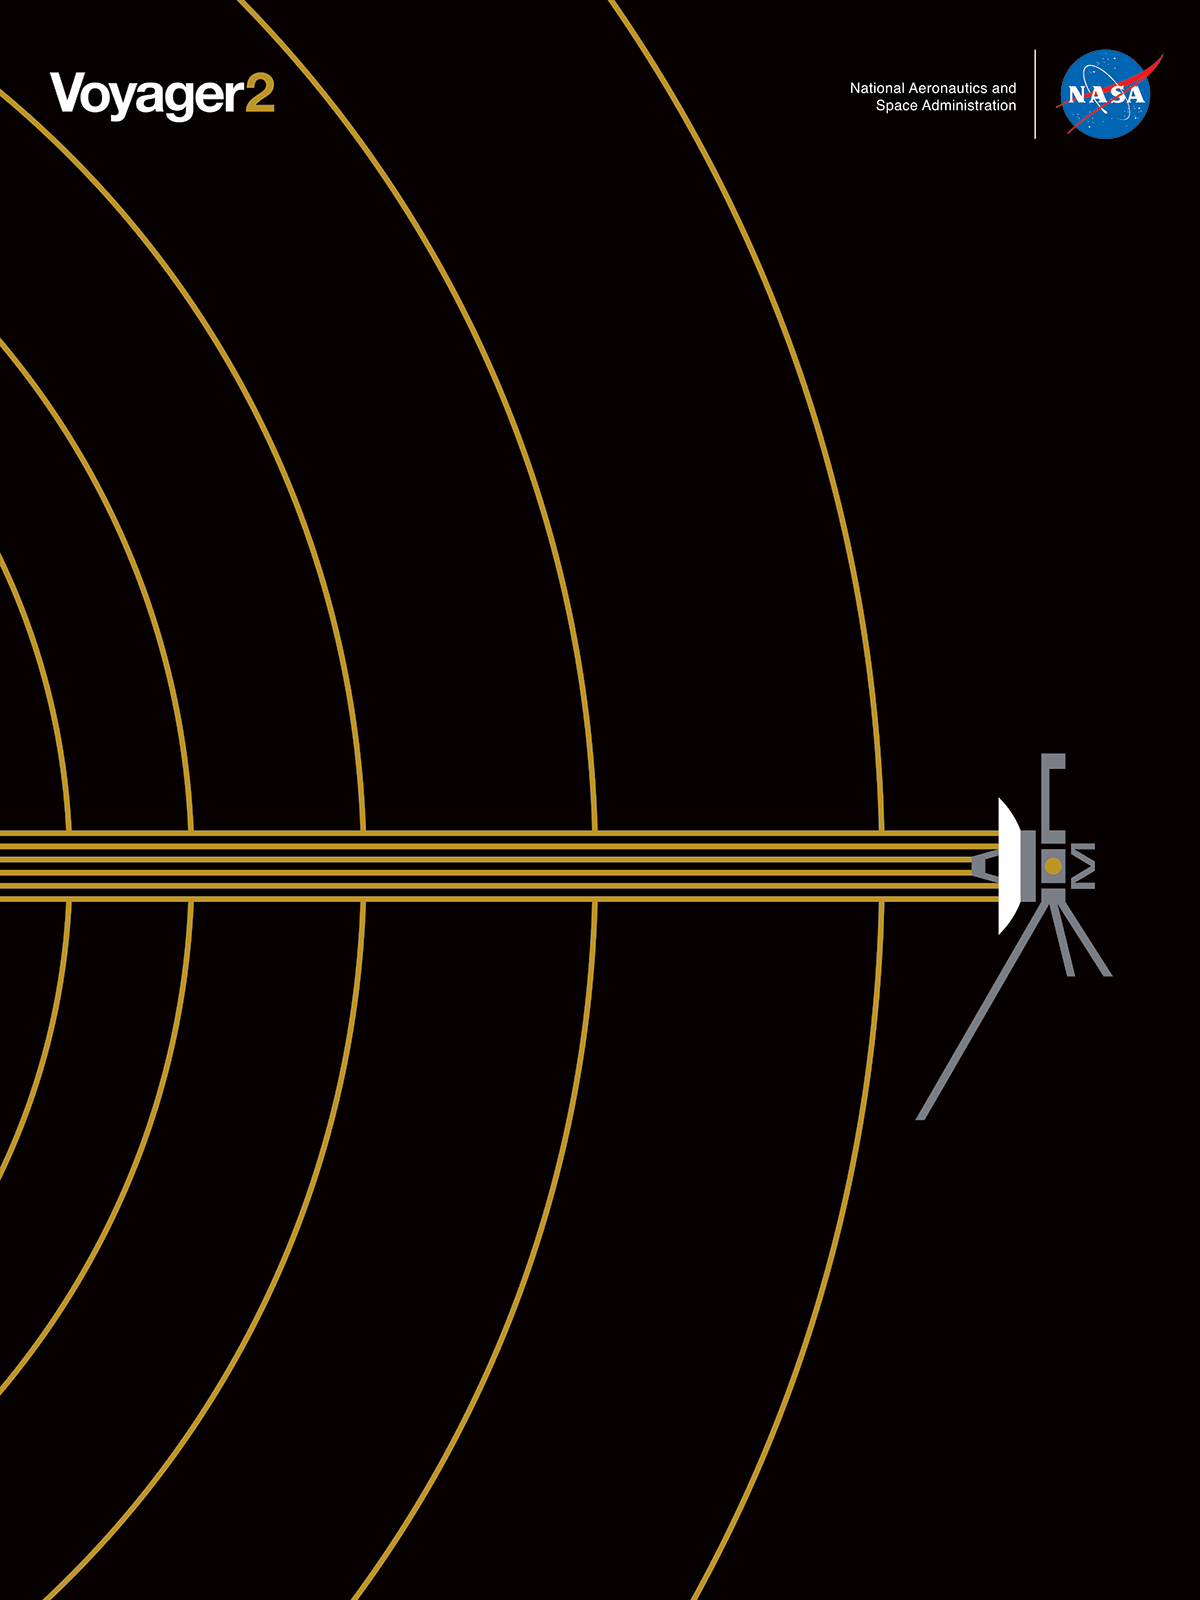 This artistic graphic illustrates Voyager 2's journey into interstellar space.